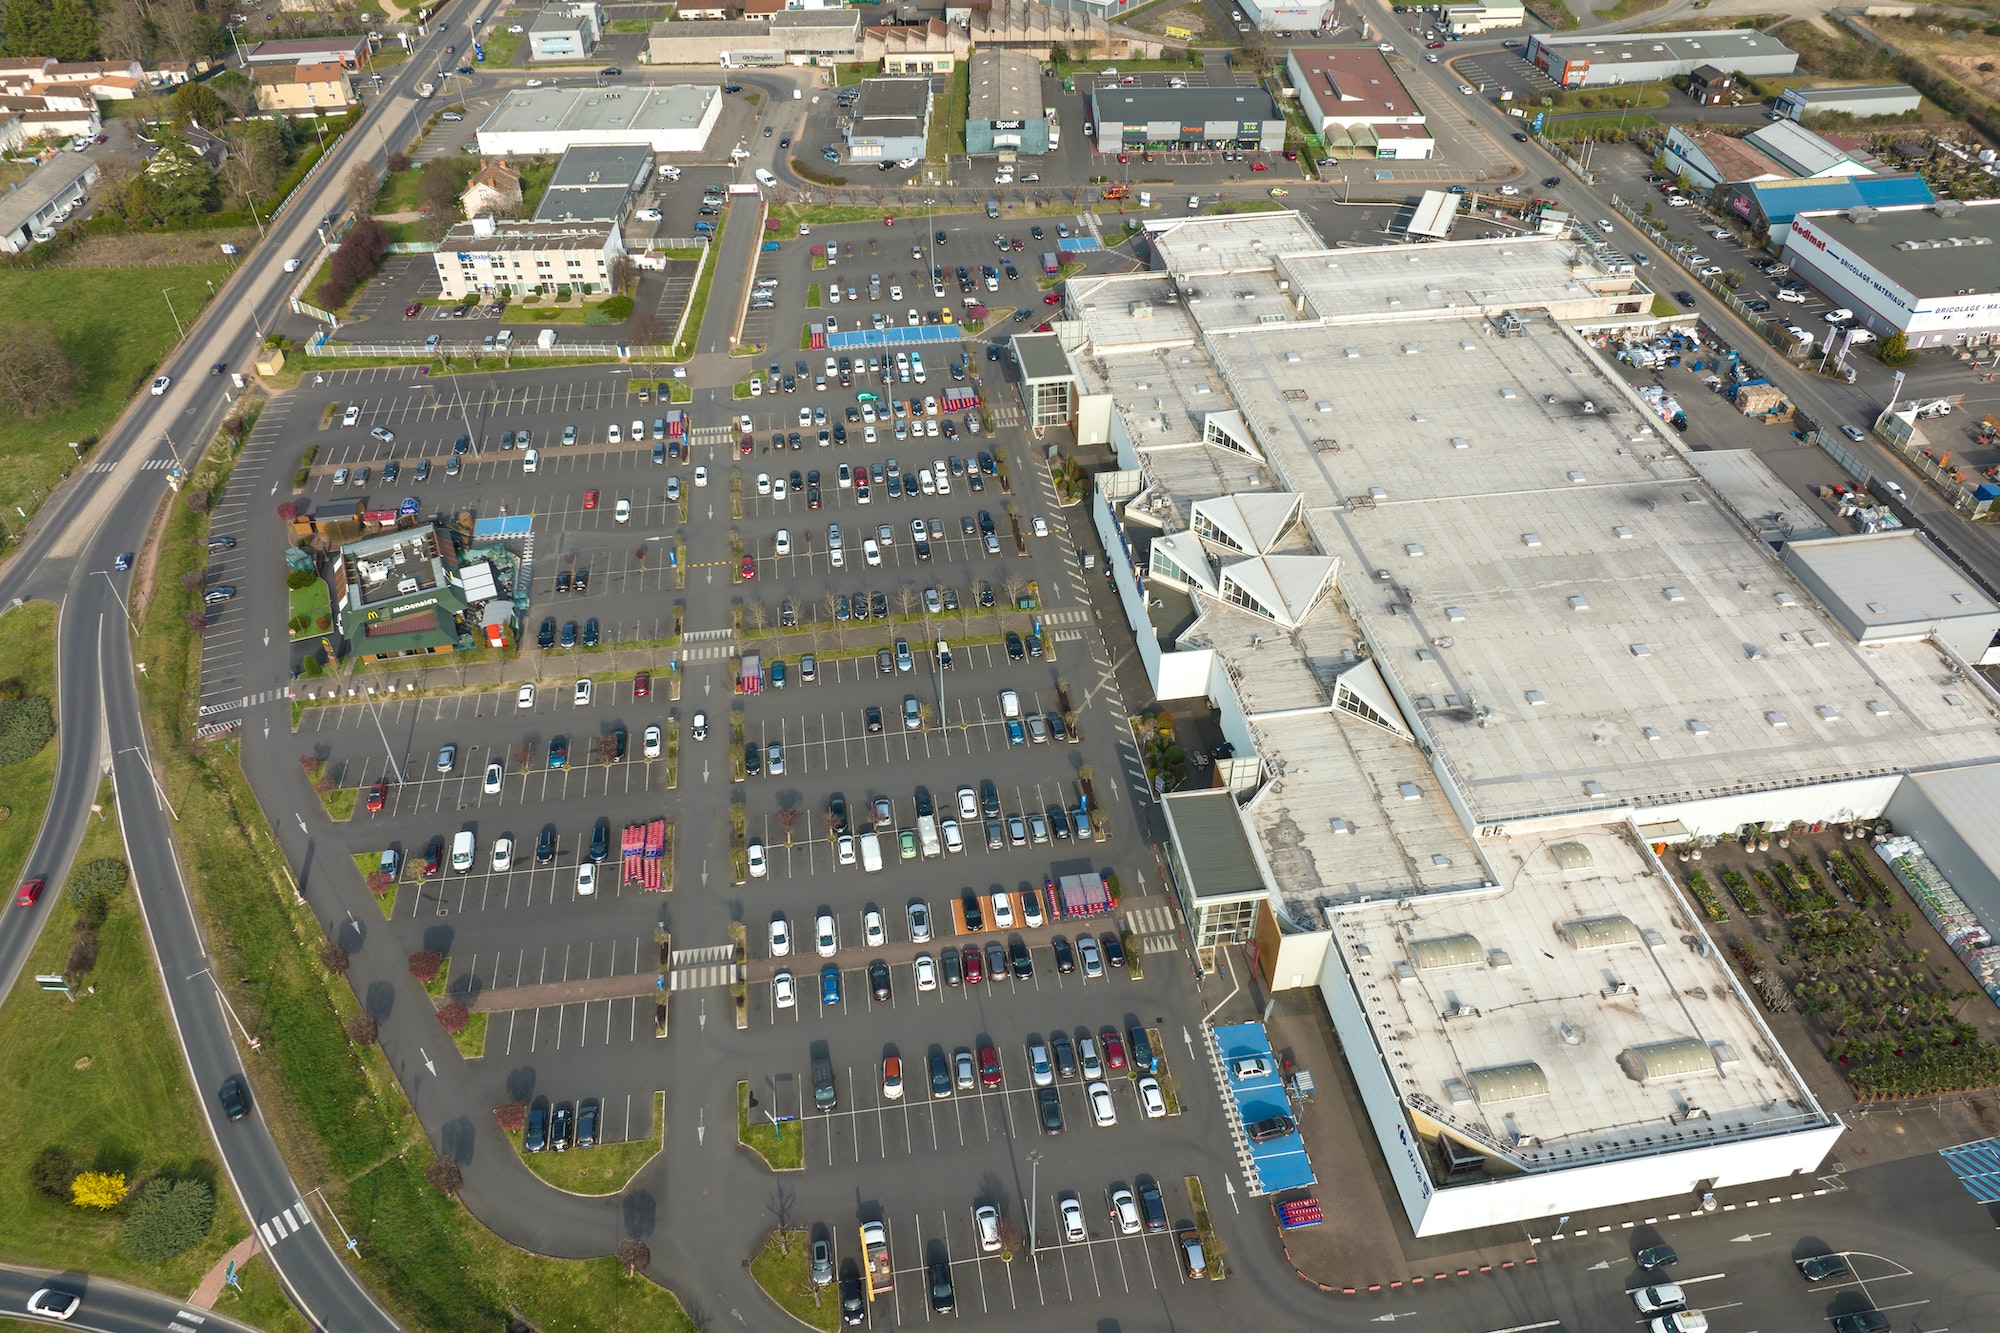 Aerial view of many colorful cars parked on parking lot with lines and markings for parking places